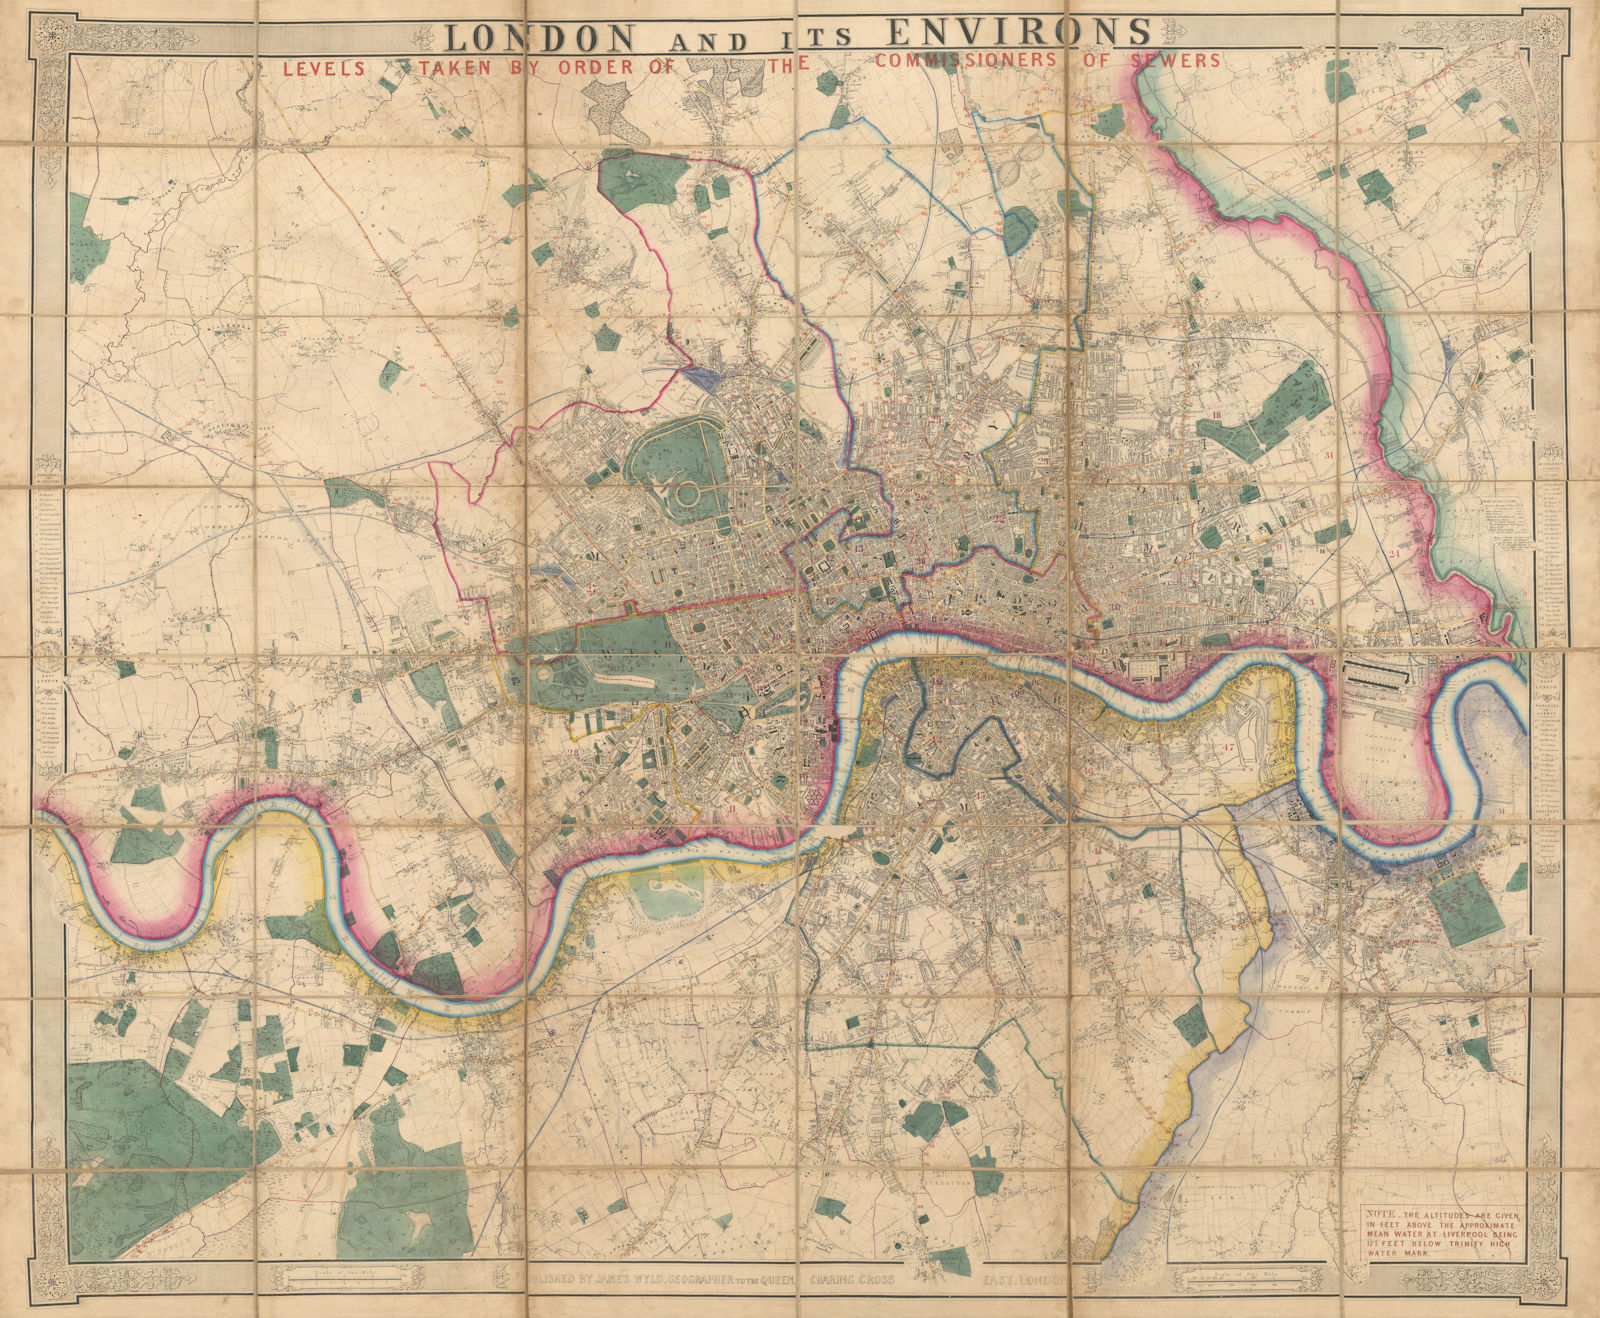 Associate Product London and its environs by James Wyld. 108x130cm. Folding map on linen c1850